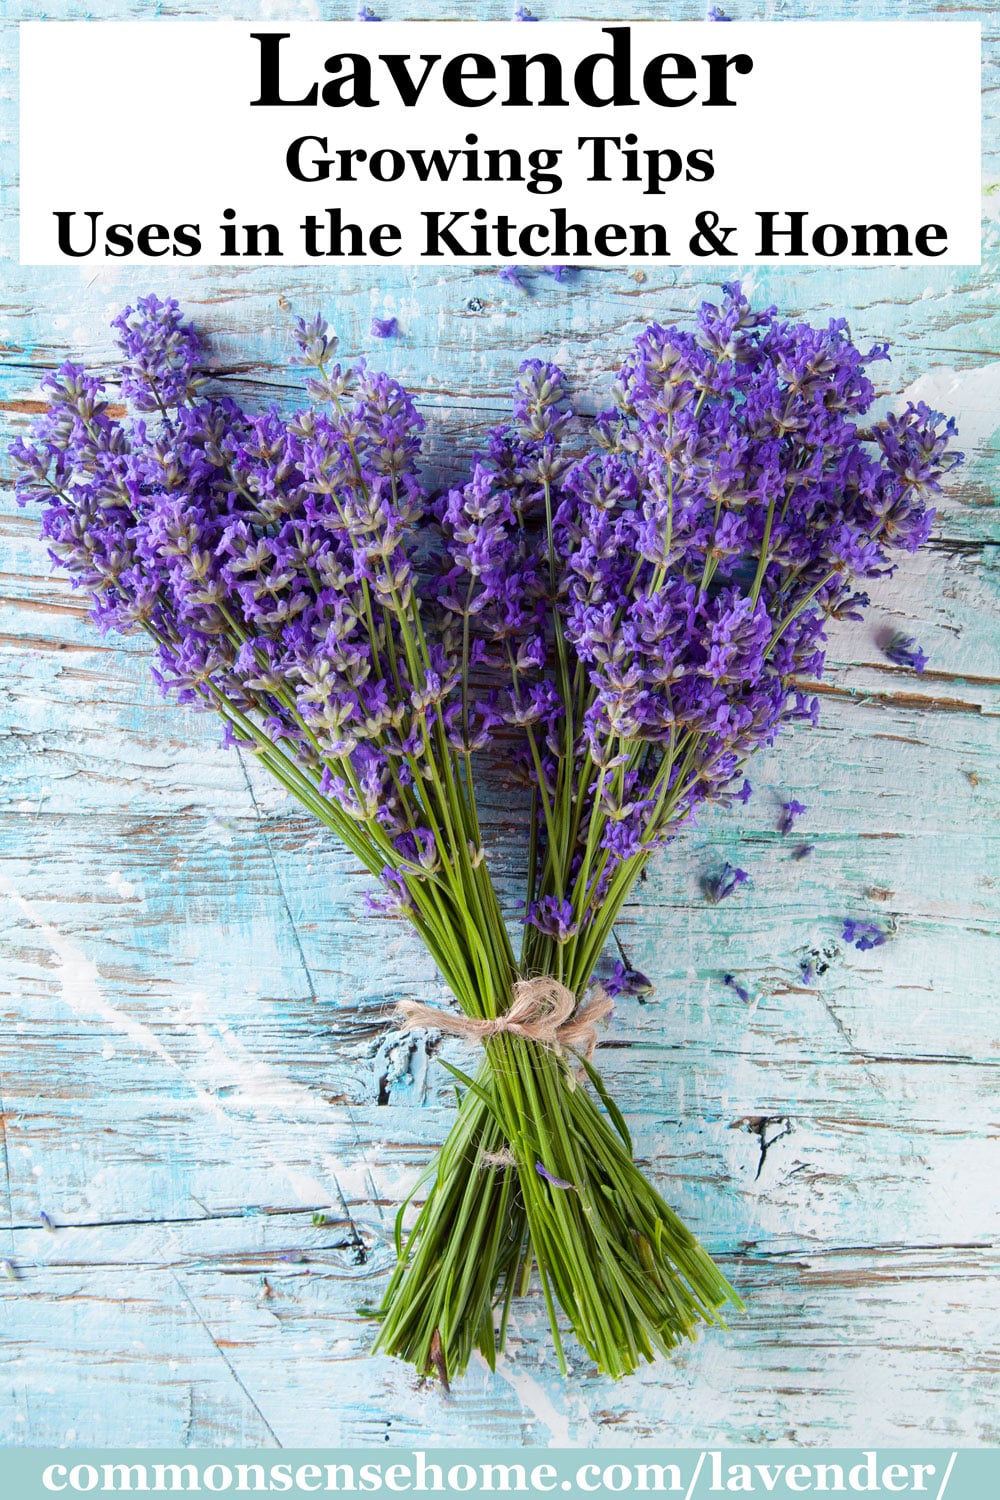 Lavender Plants – Growing Tips & Uses in the Kitchen and Home